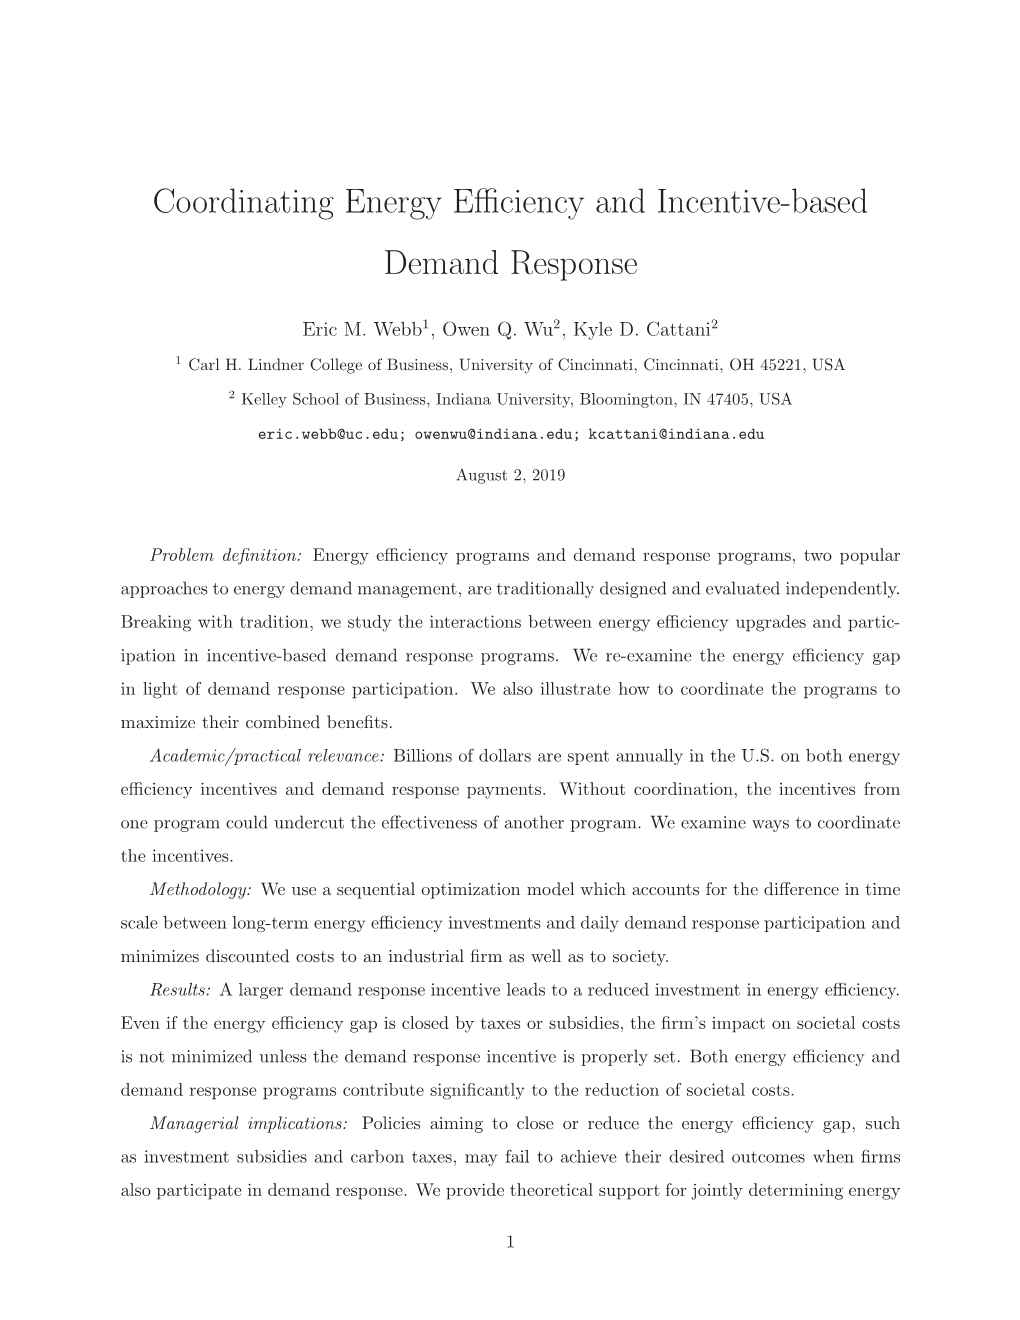 Coordinating Energy Efficiency and Incentive-Based Demand Response